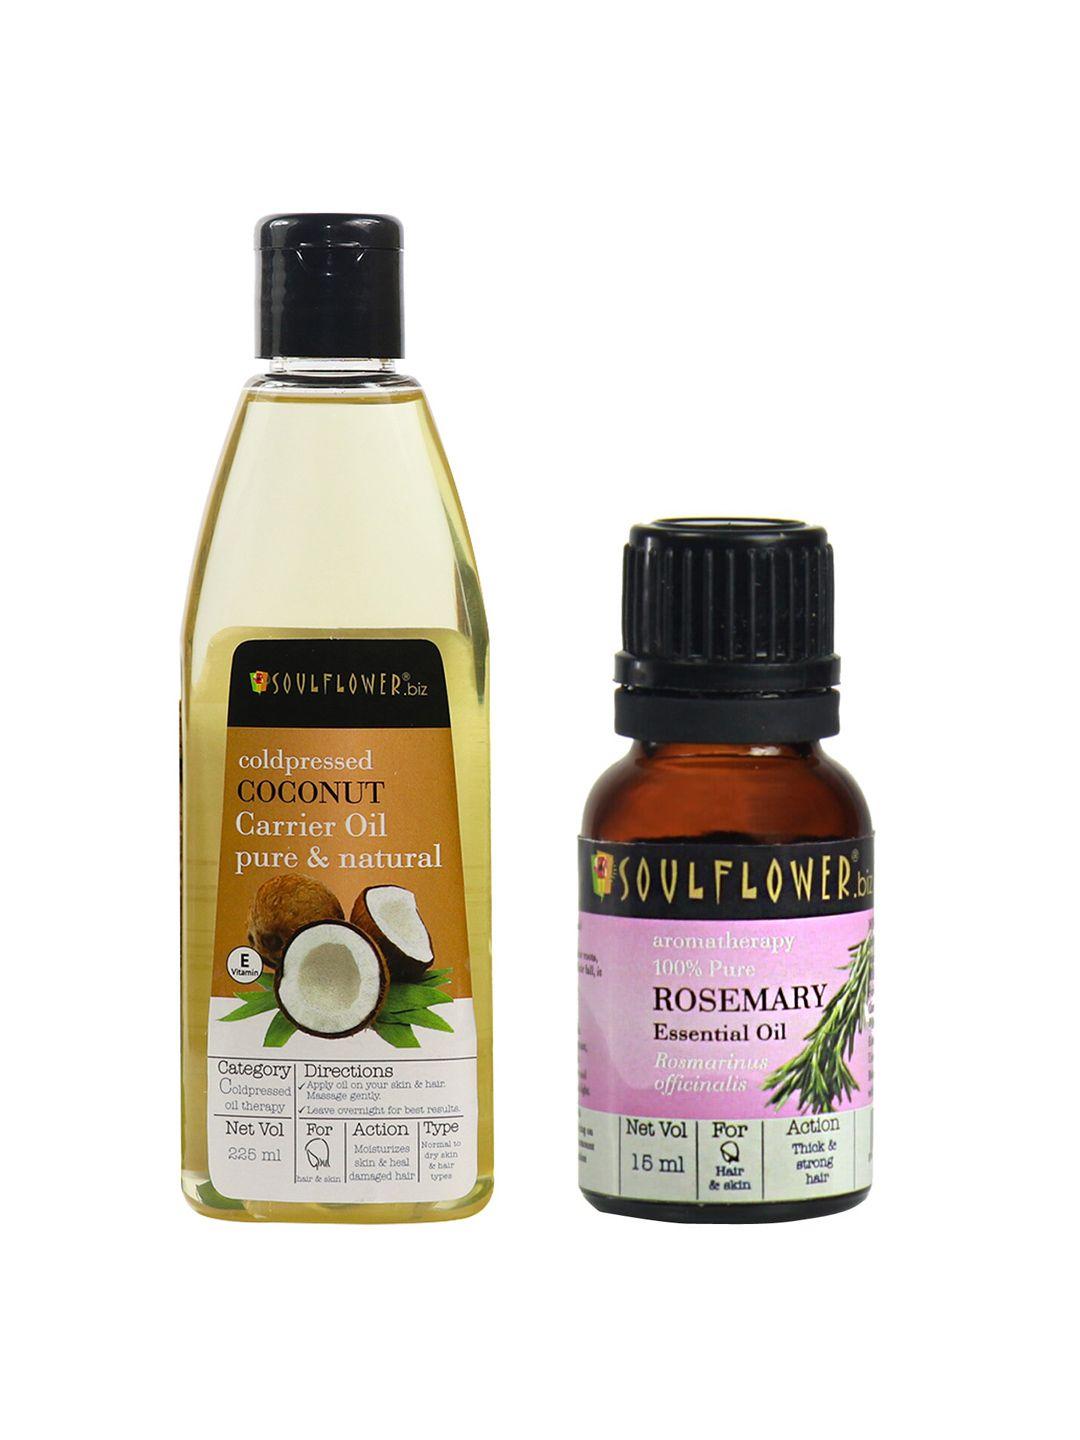 soulflower set of rosemary essential oil 15ml & coldpressed coconut carrier oil 225ml